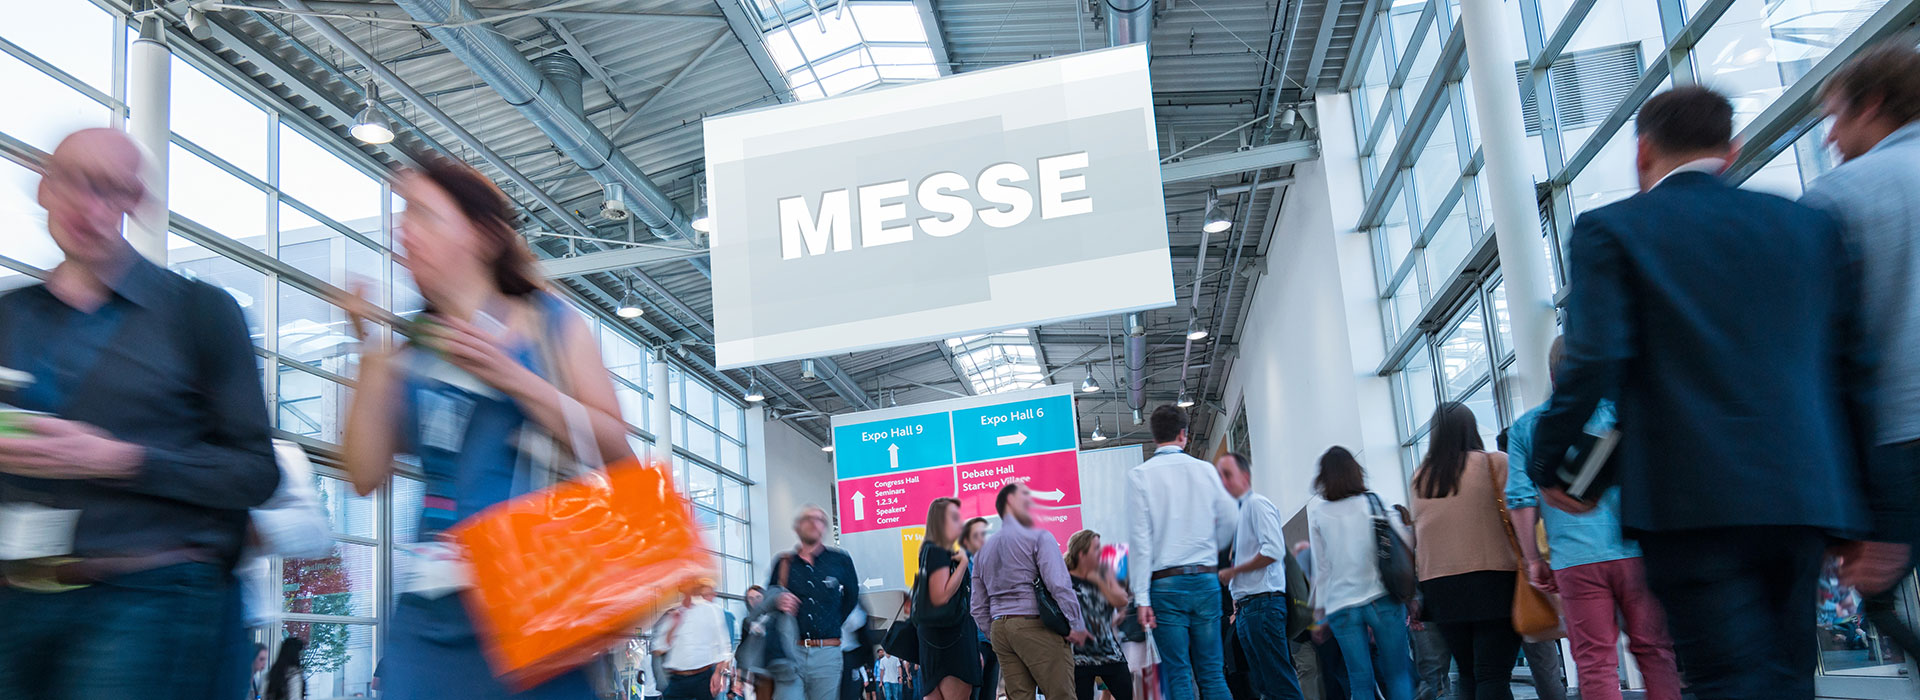 Messe by Indunorm